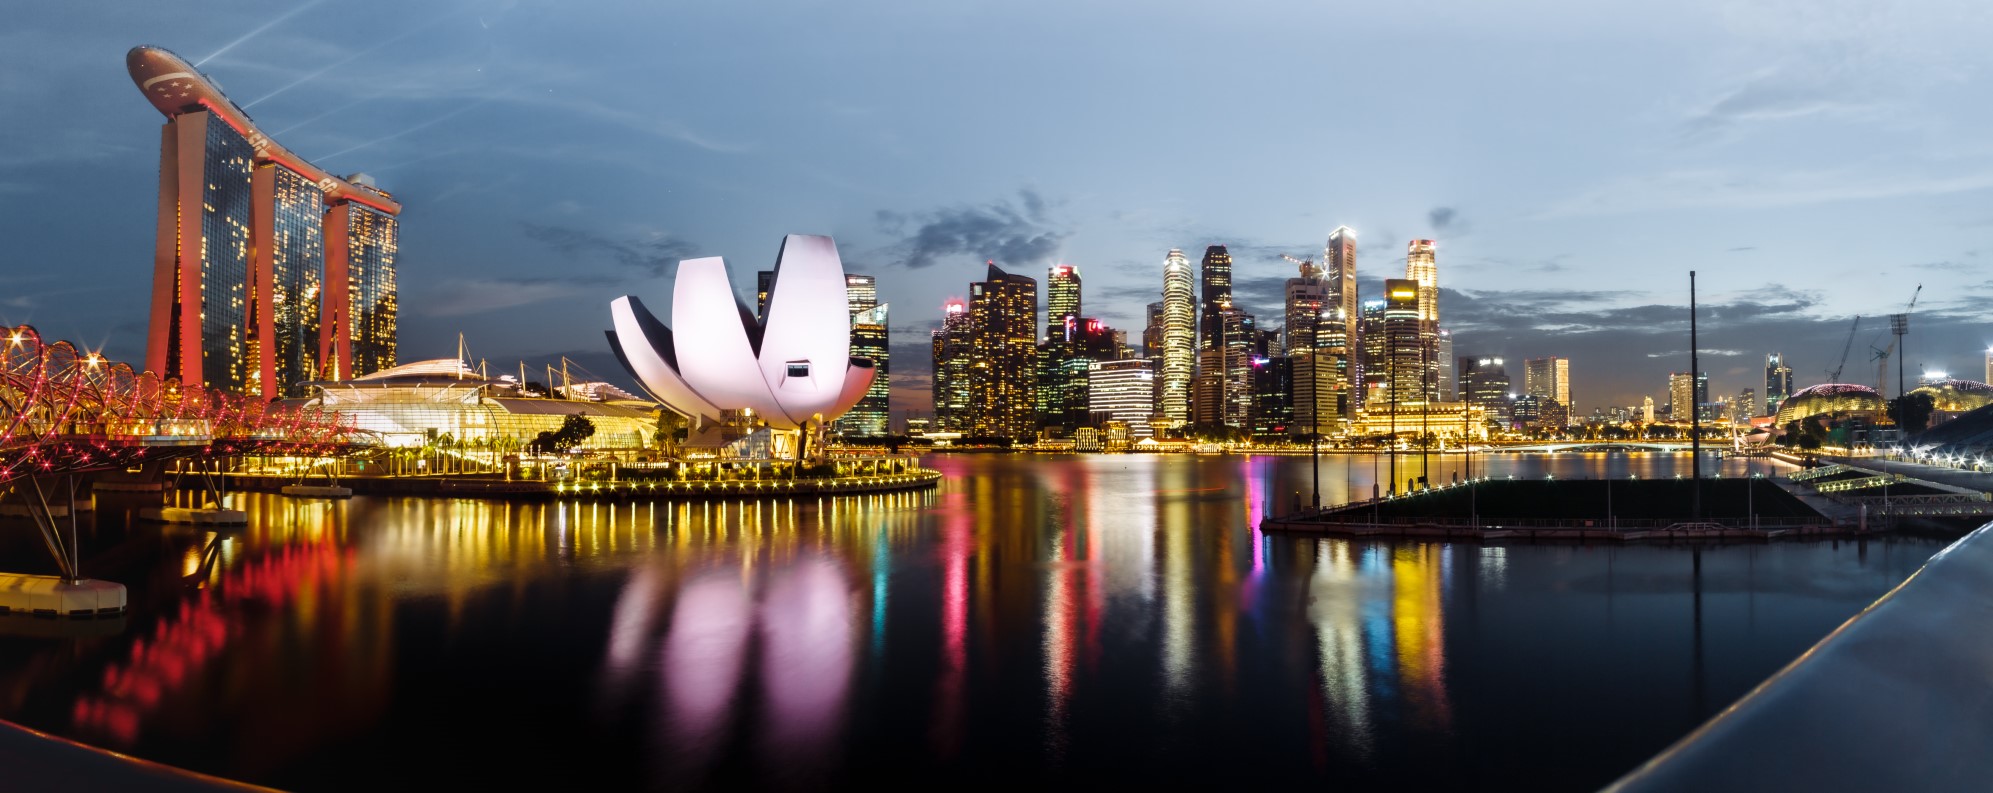 STATE-OF-THE-ART SINGAPORE - 4NIGHTS/5DAYS